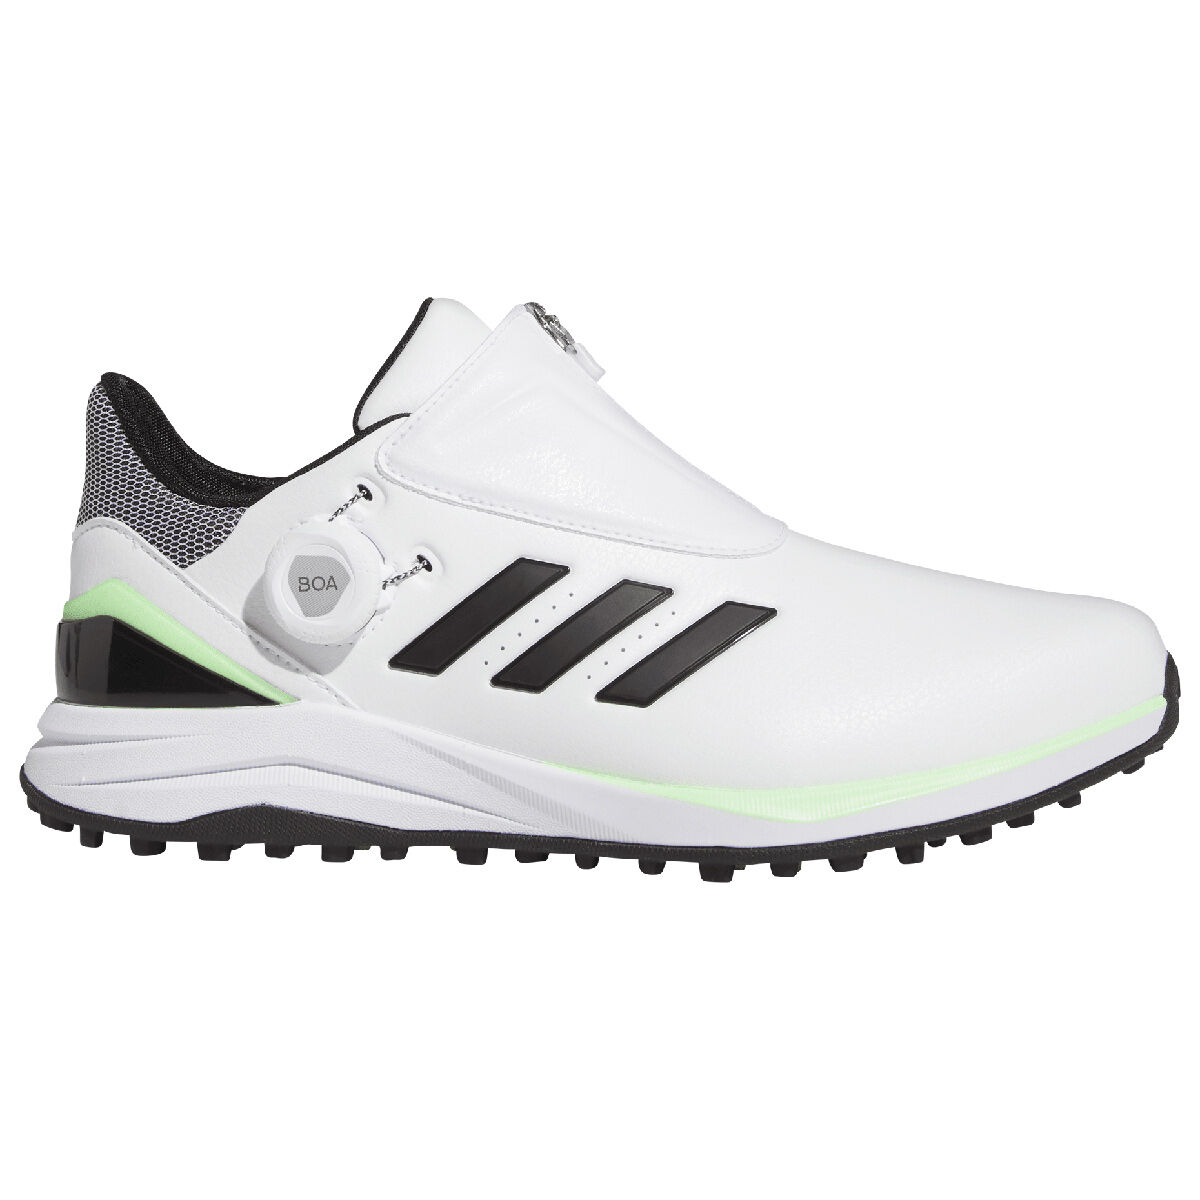 adidas SOLARmotion BOA Spikeless Waterproof Golf Shoes, Mens, White/core black/green spark, 10 | American Golf